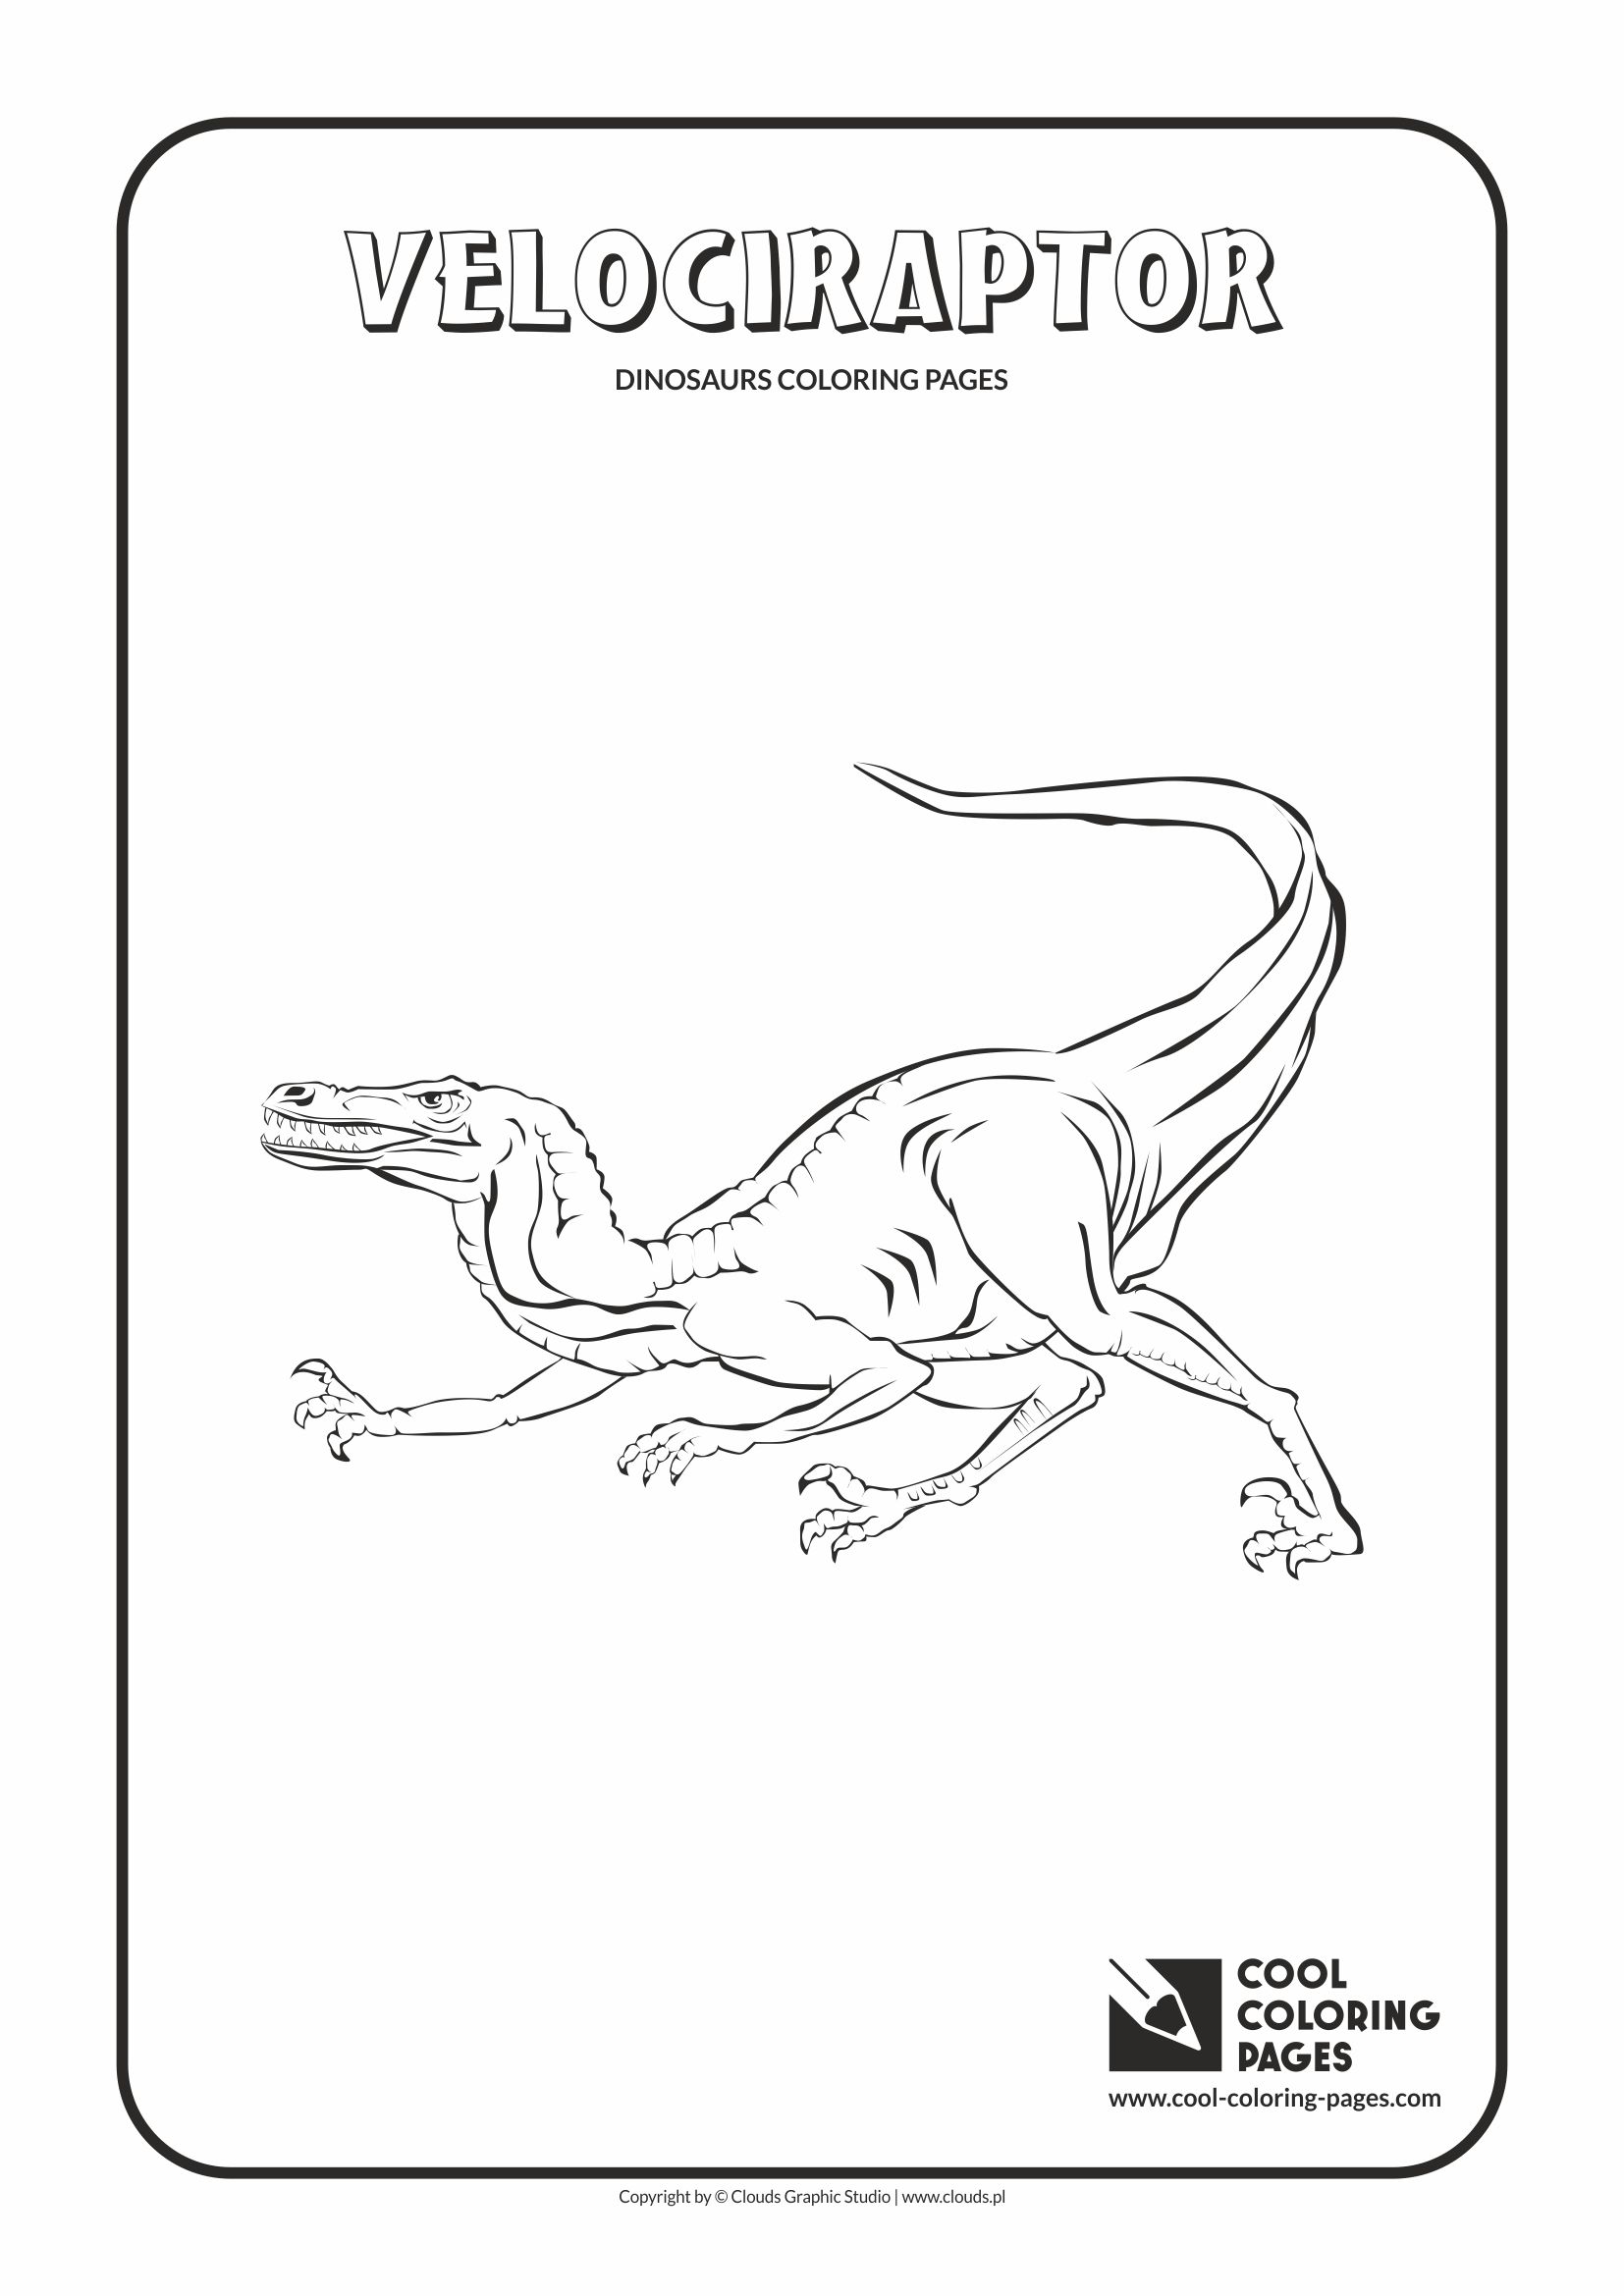 Cool Coloring Pages - Animals / Velociraptor / Coloring page with velociraptor